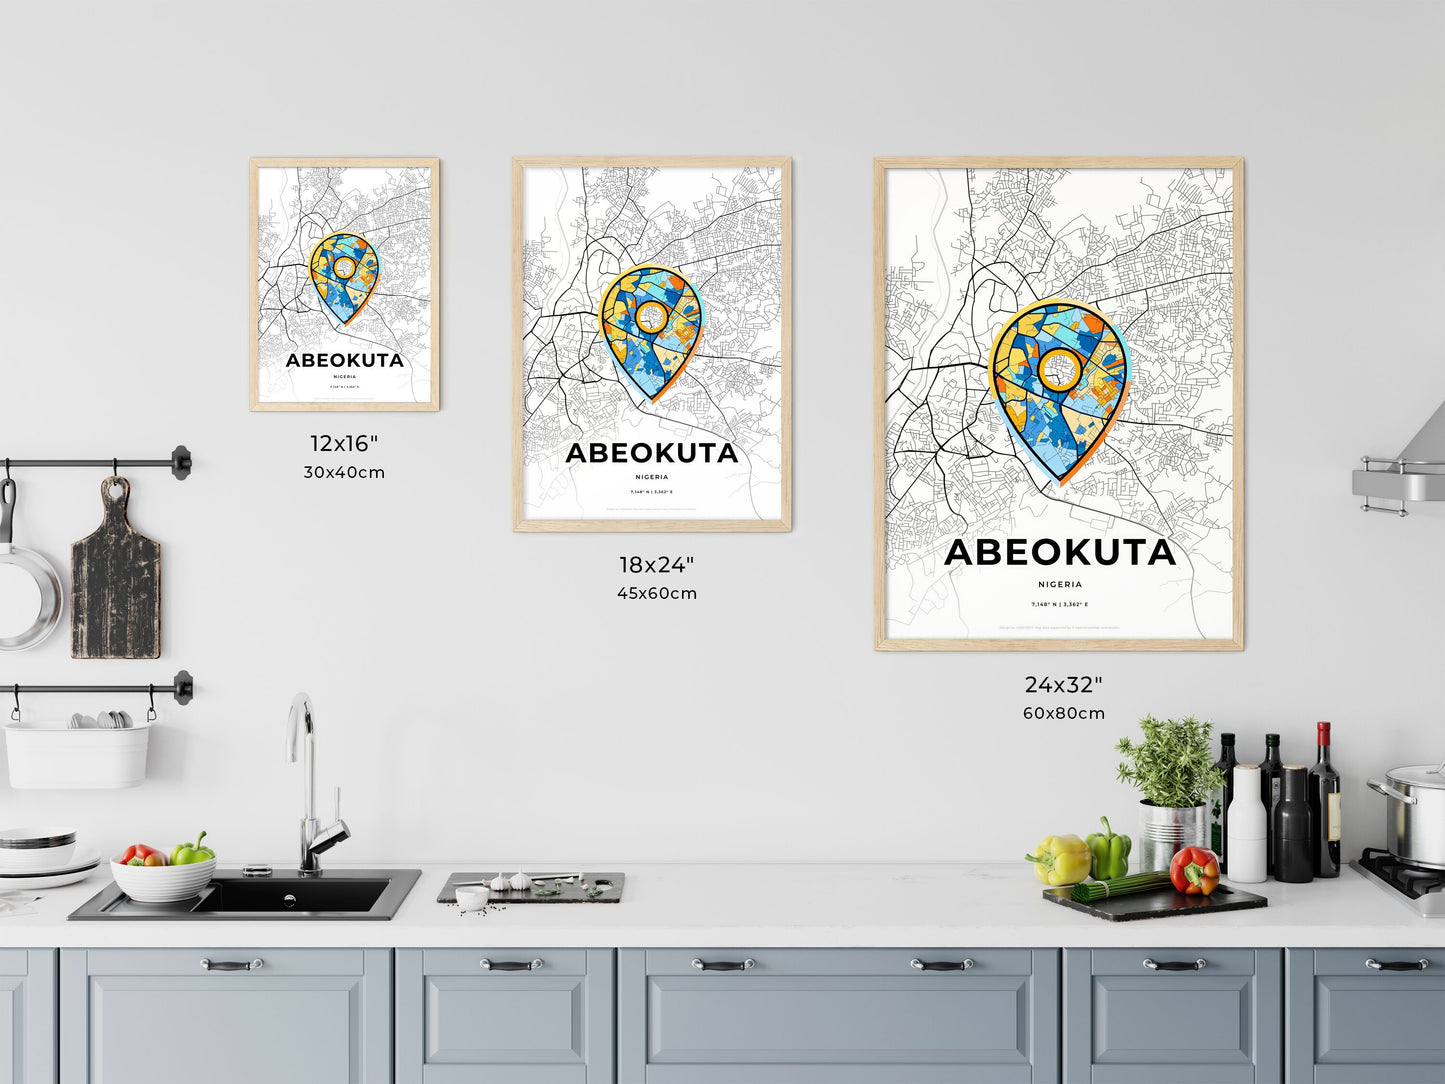 ABEOKUTA NIGERIA minimal art map with a colorful icon. Where it all began, Couple map gift.